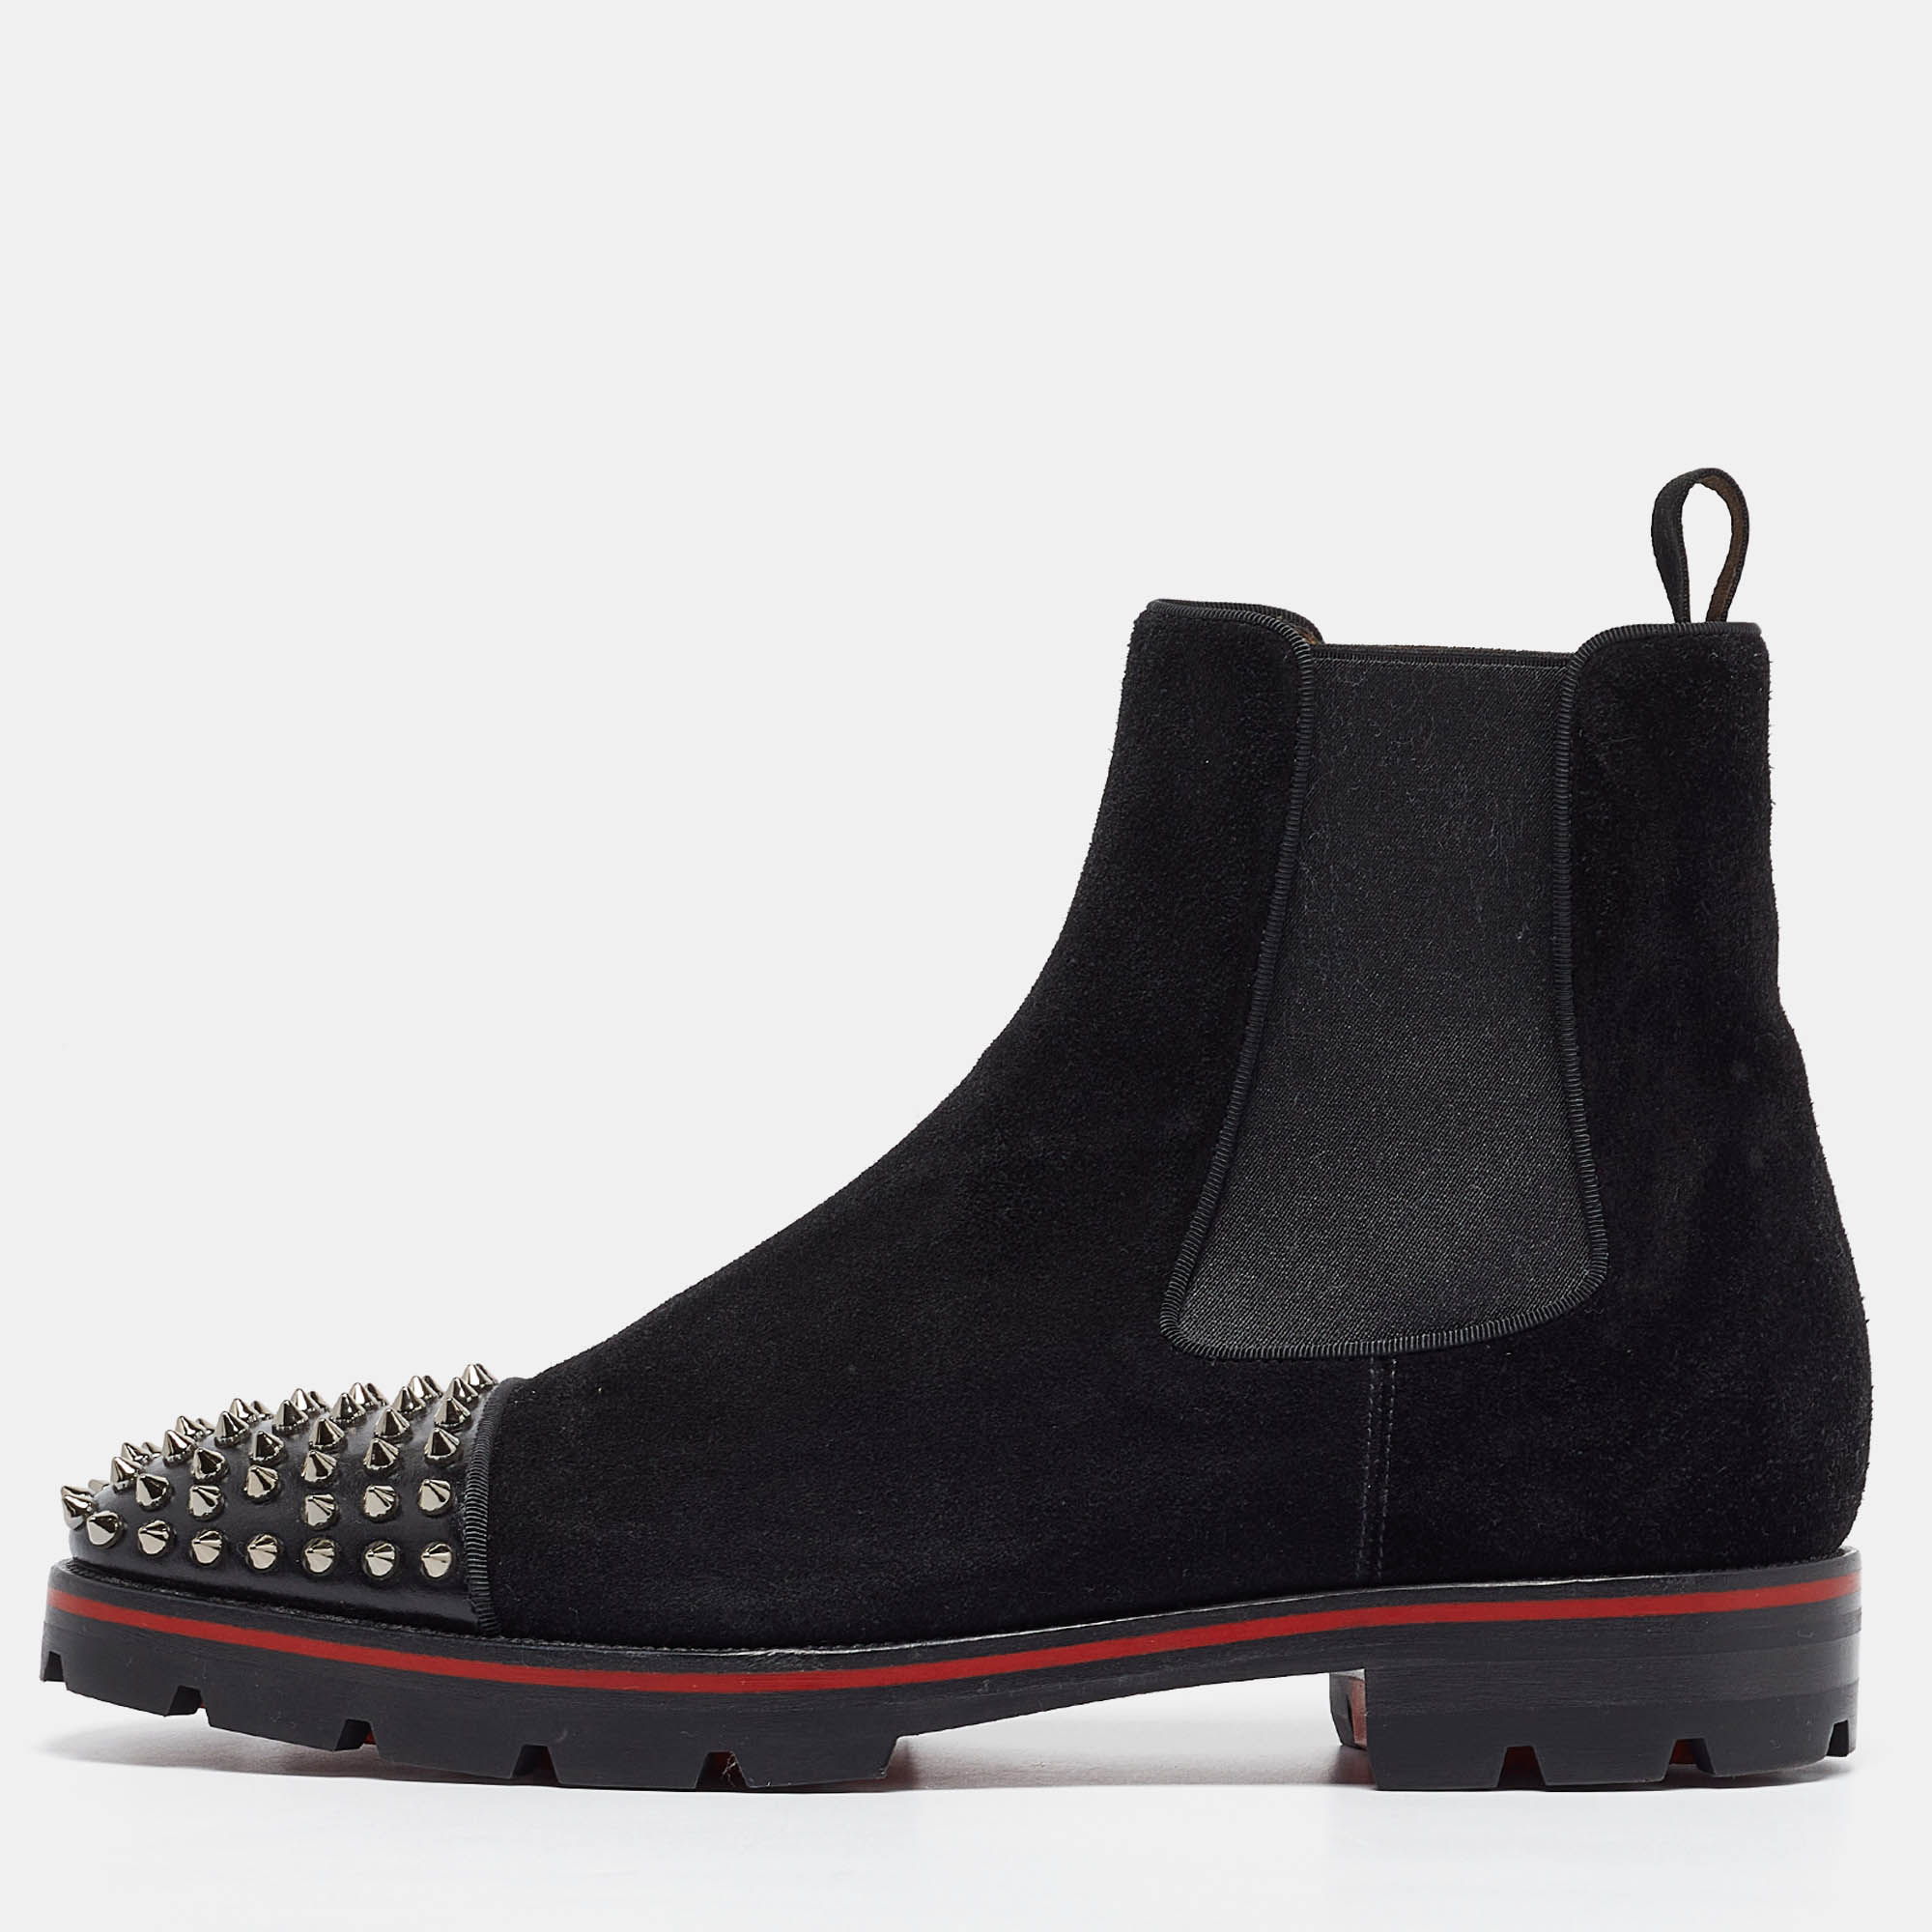 Christian louboutin black suede melon spikes ankle boots size 43